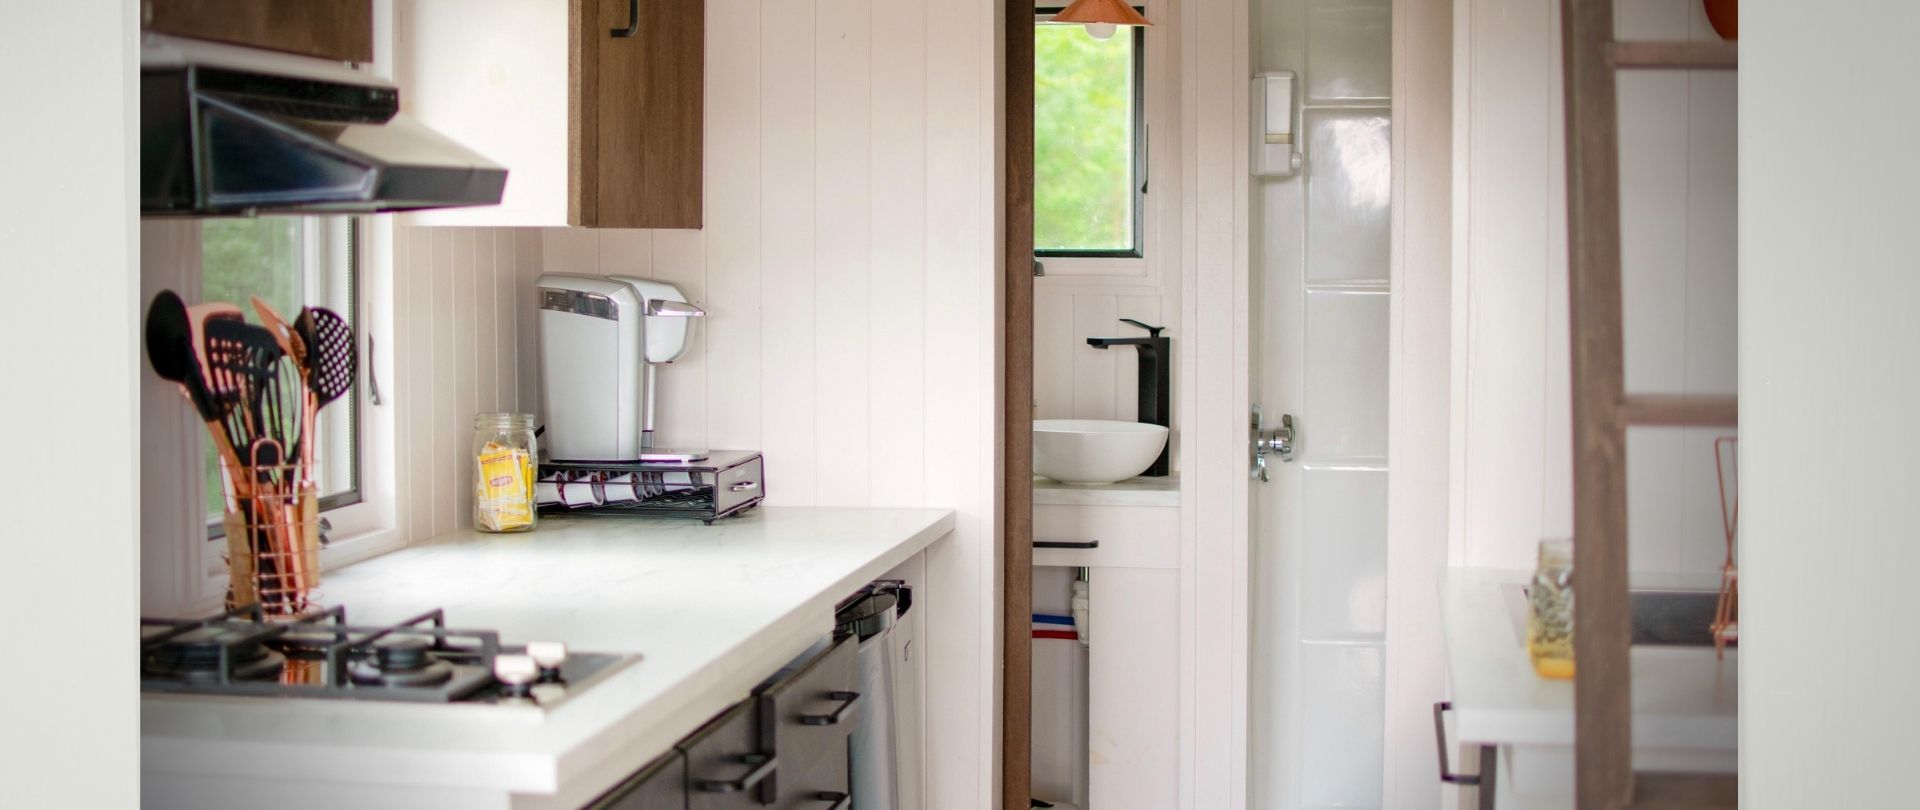 tiny house -inside with kitchen counter, bathroom sink, and ladder